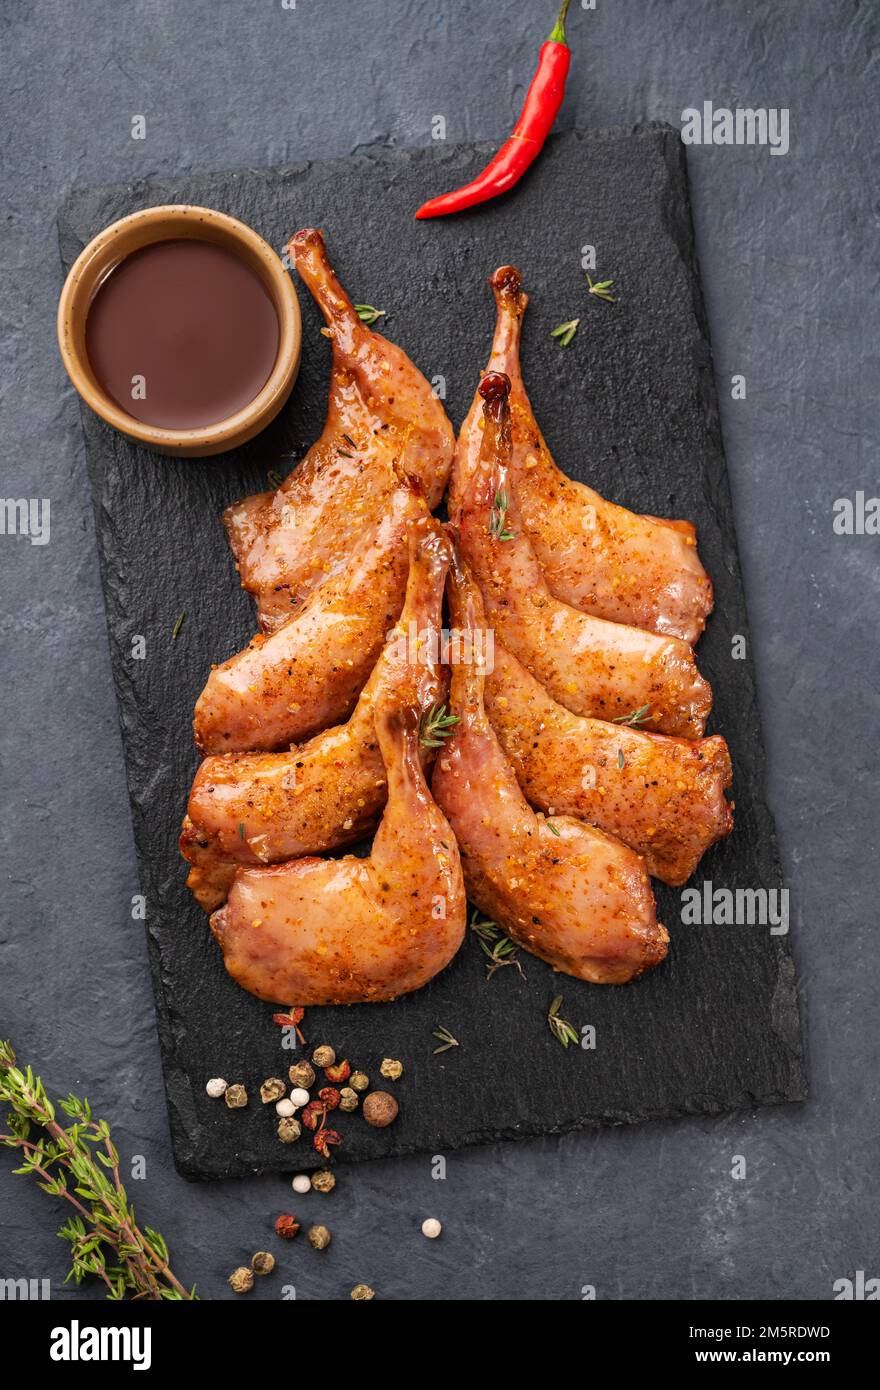 Delicacies. Grilled BBQ quail legs in marinade and spices on black slate with fresh herbs and sauce on a dark background. Healthy diet food. Top view. Stock Photo